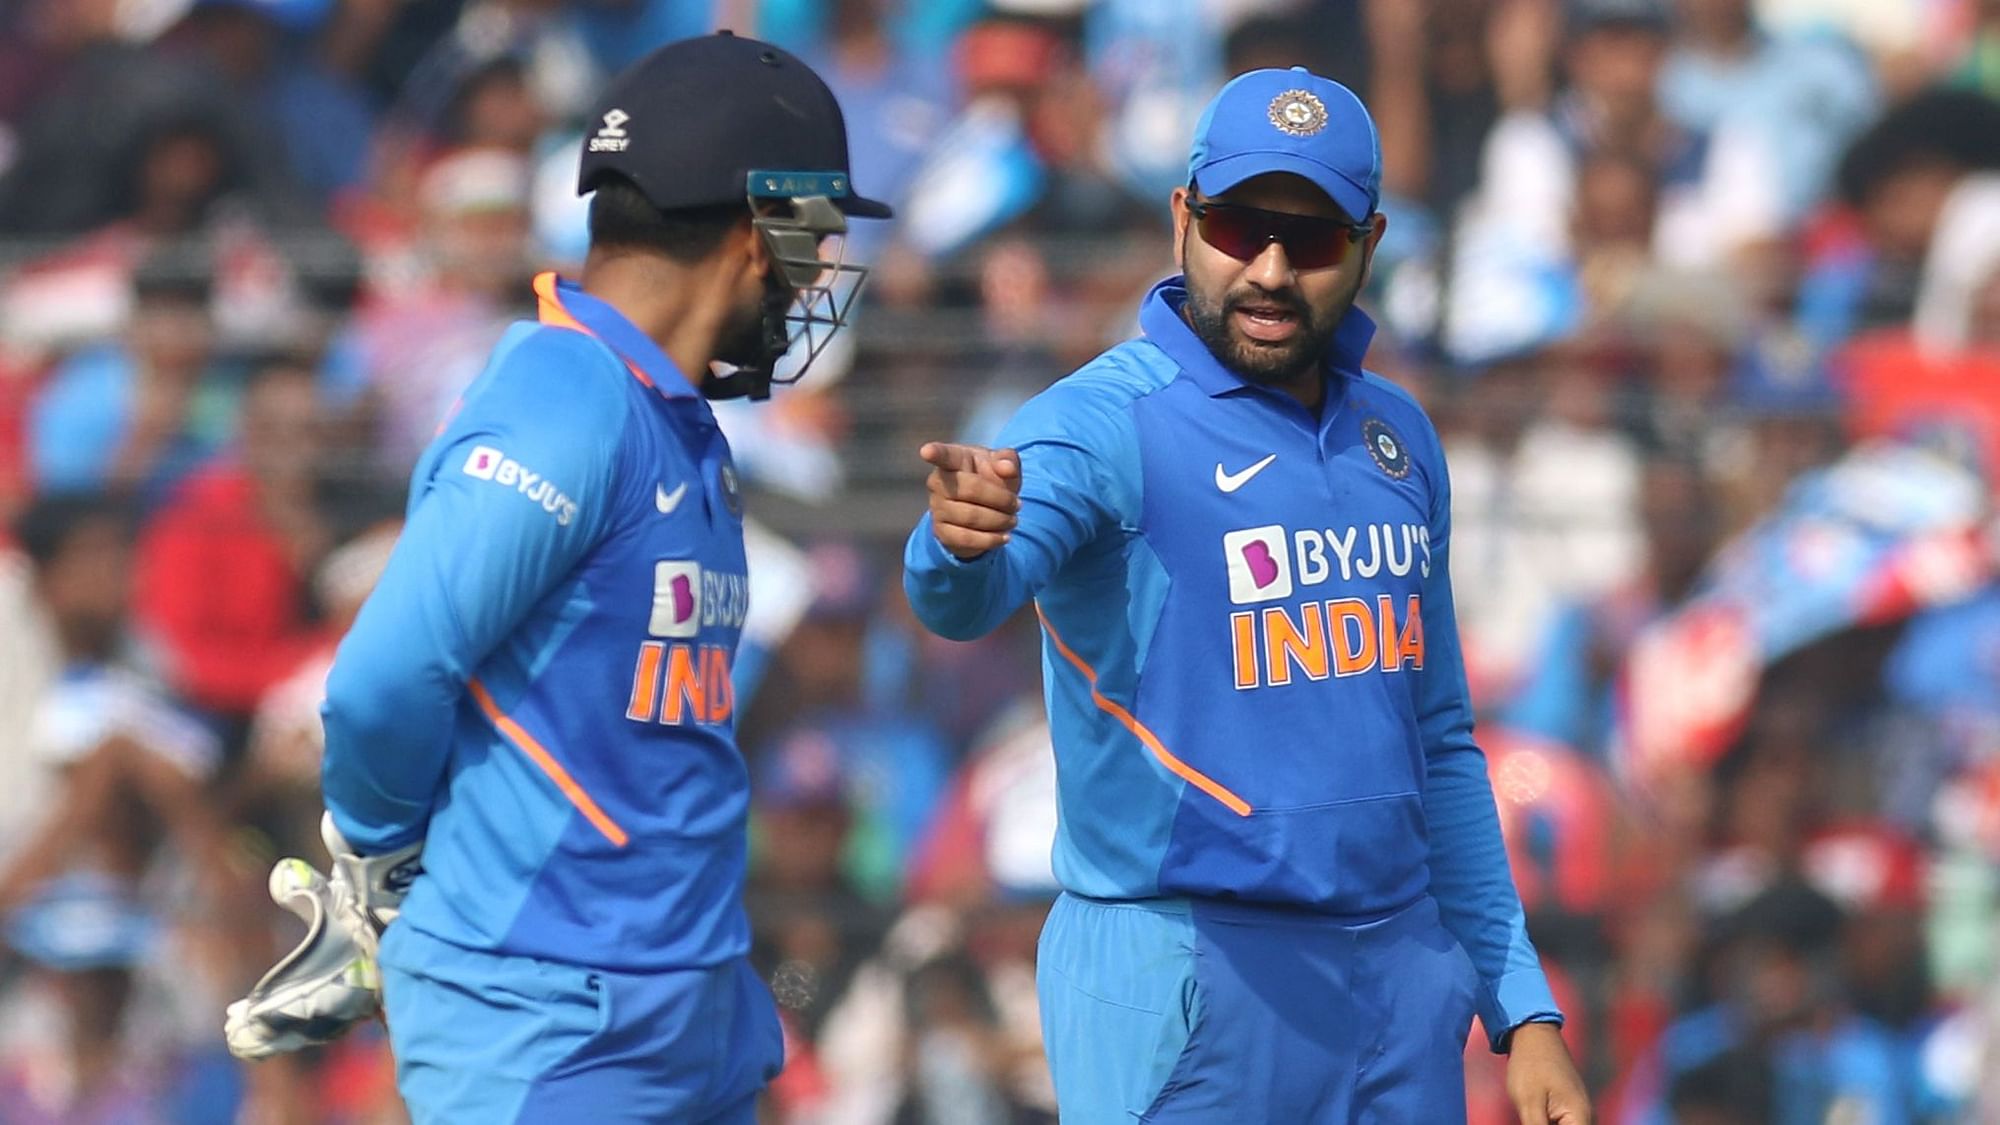 Ravindra Jadeja and Rishabh Pant dropped catches against West Indies in the third and final ODI in Cuttack on Sunday.